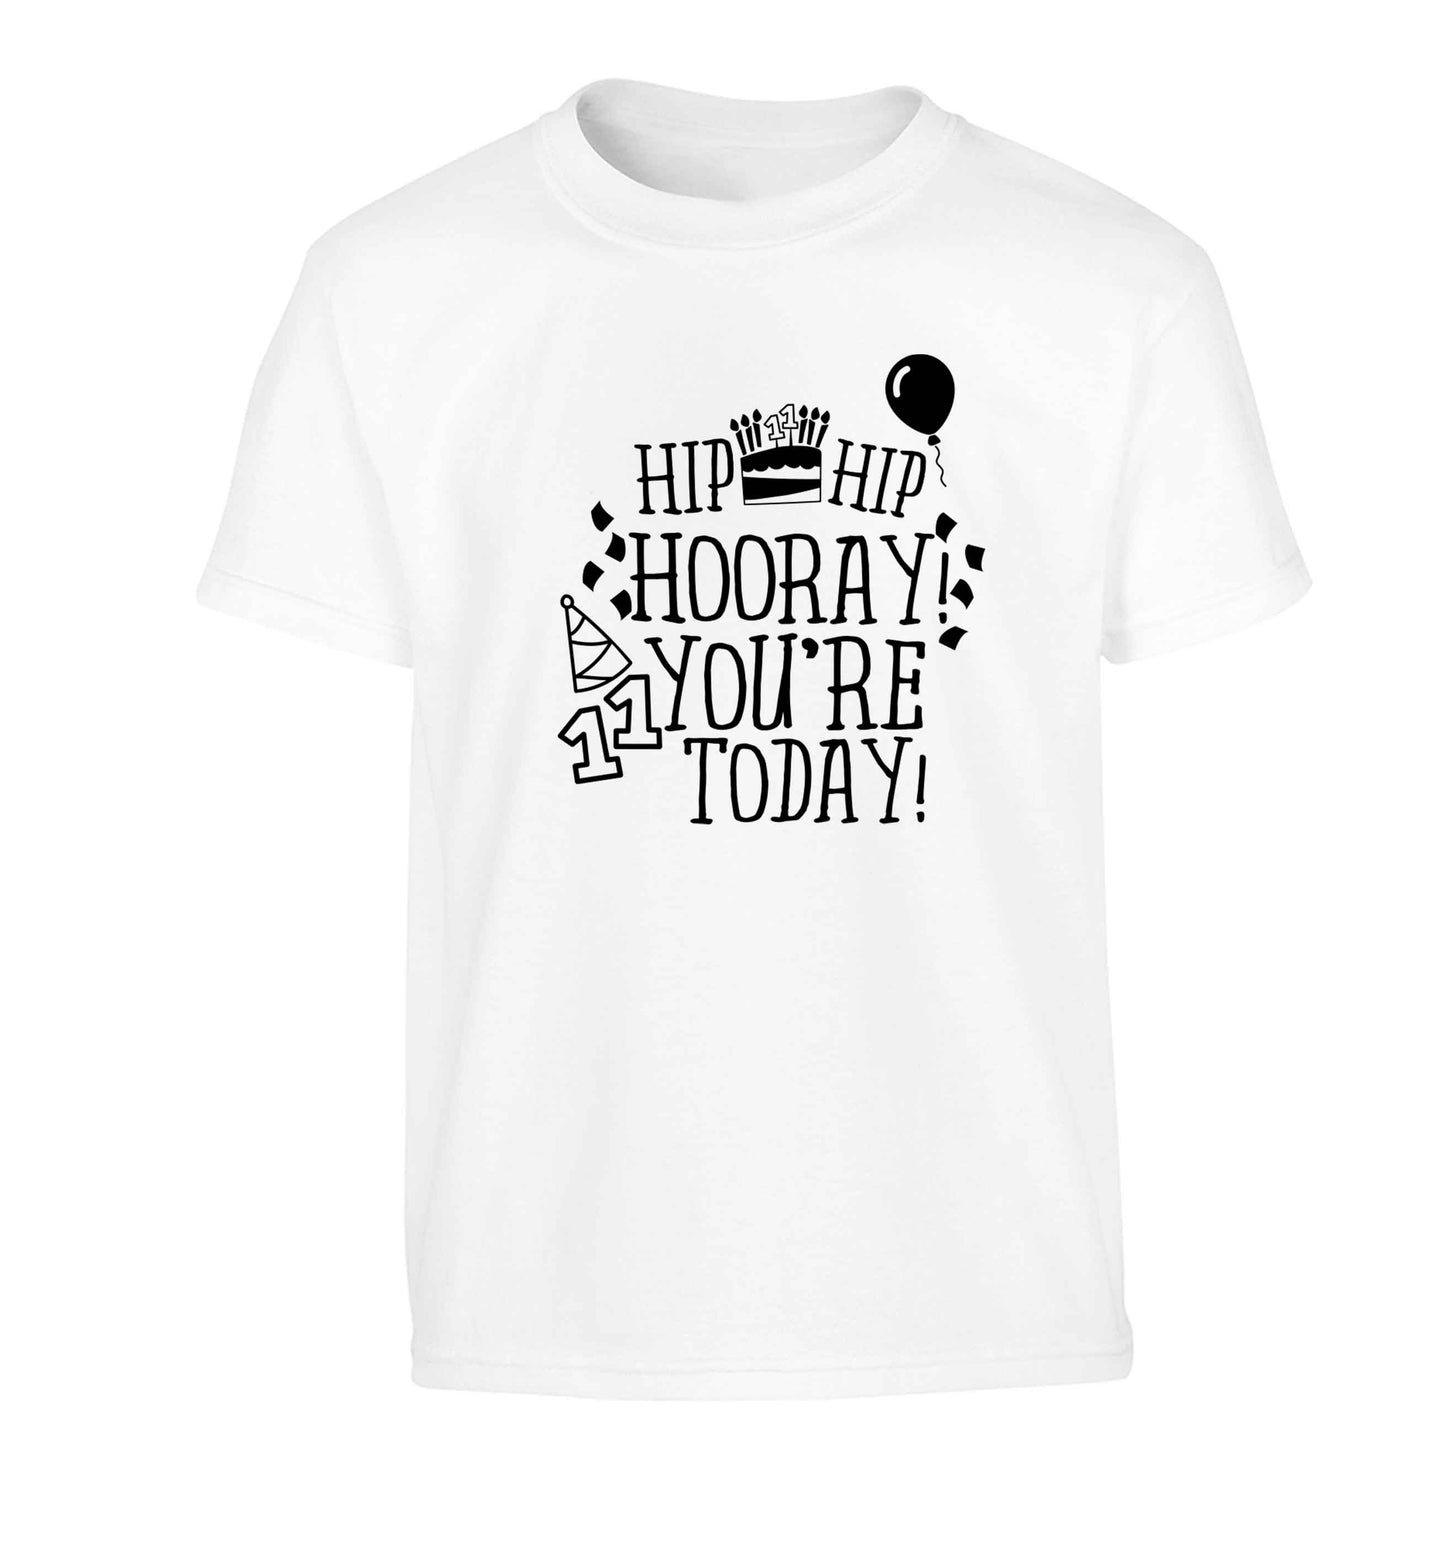 Hip hip hooray I you're eleven today! Children's white Tshirt 12-13 Years